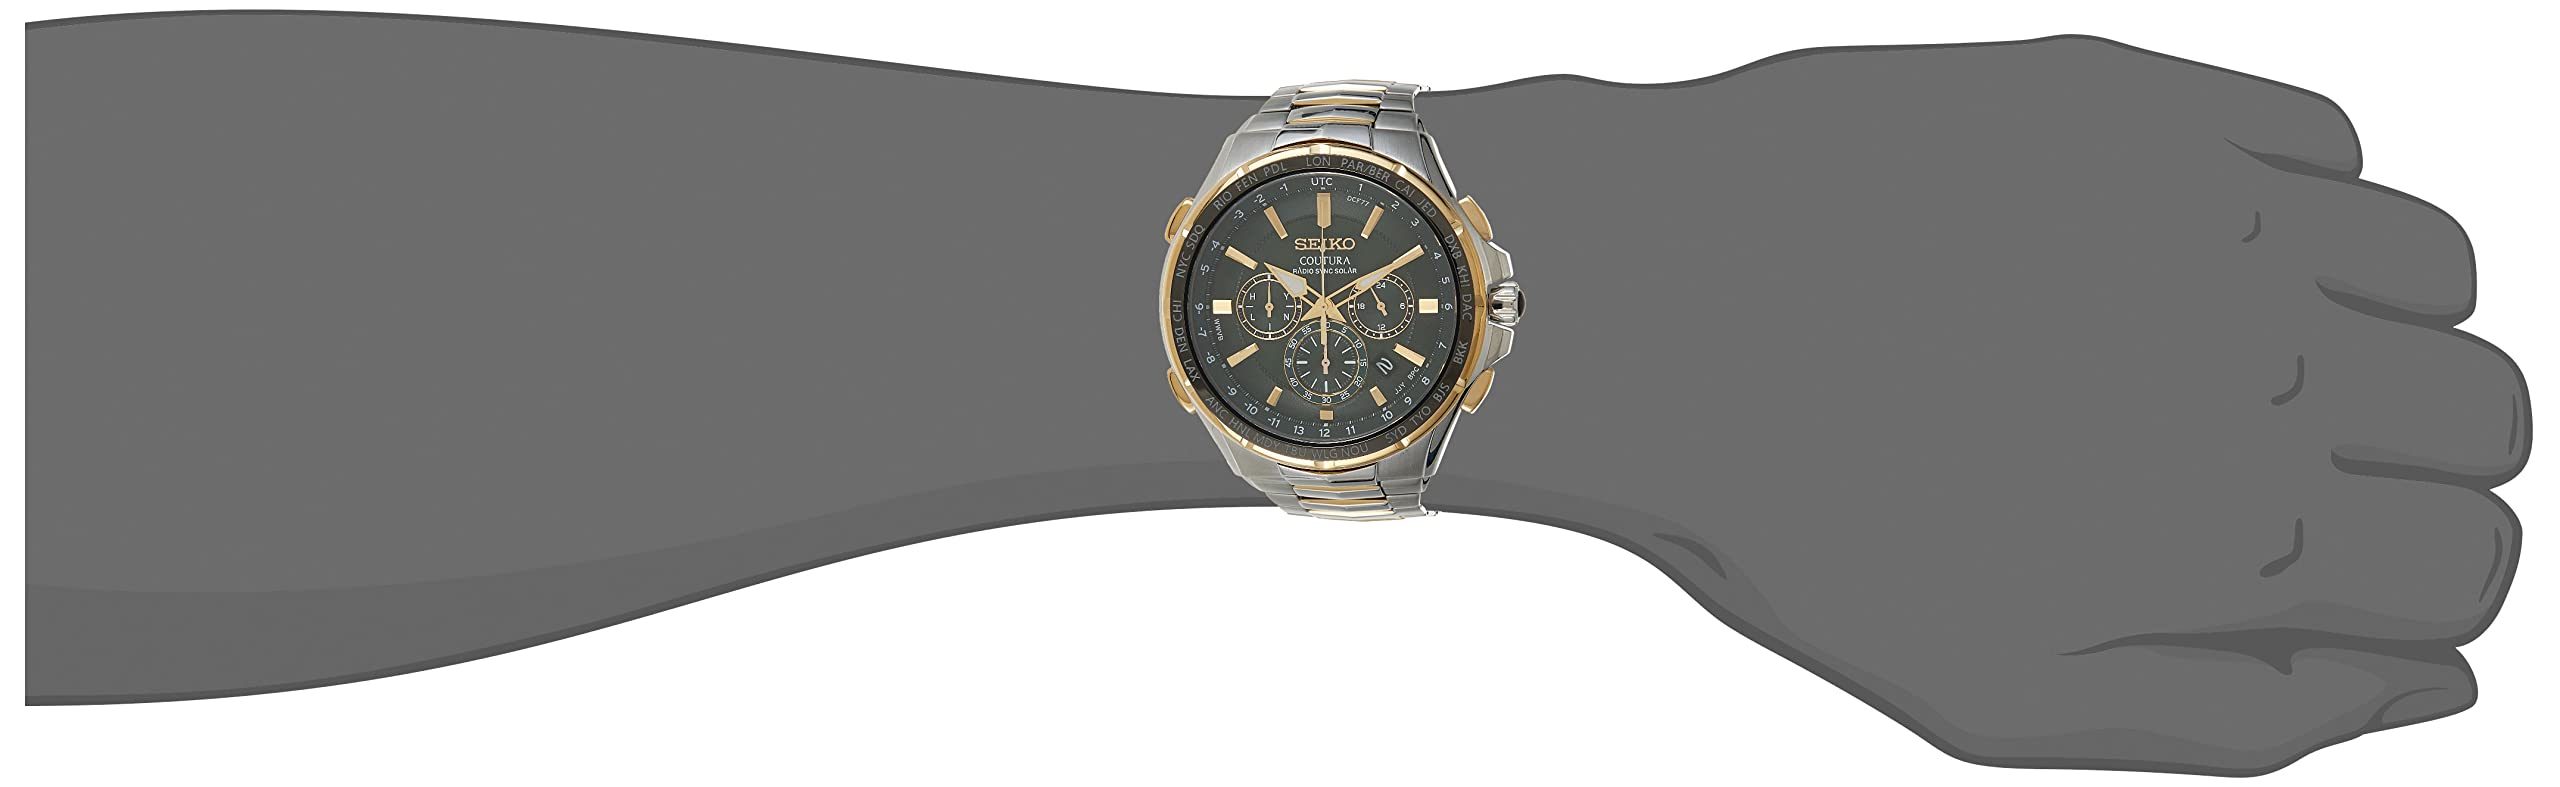 SEIKO SSG022 Watch for Men - Coutura Collection - Radio Sync Solar Chronograph, Two-Tone Case & Bracelet with Gold Accents, Green Dial, and Date Calendar